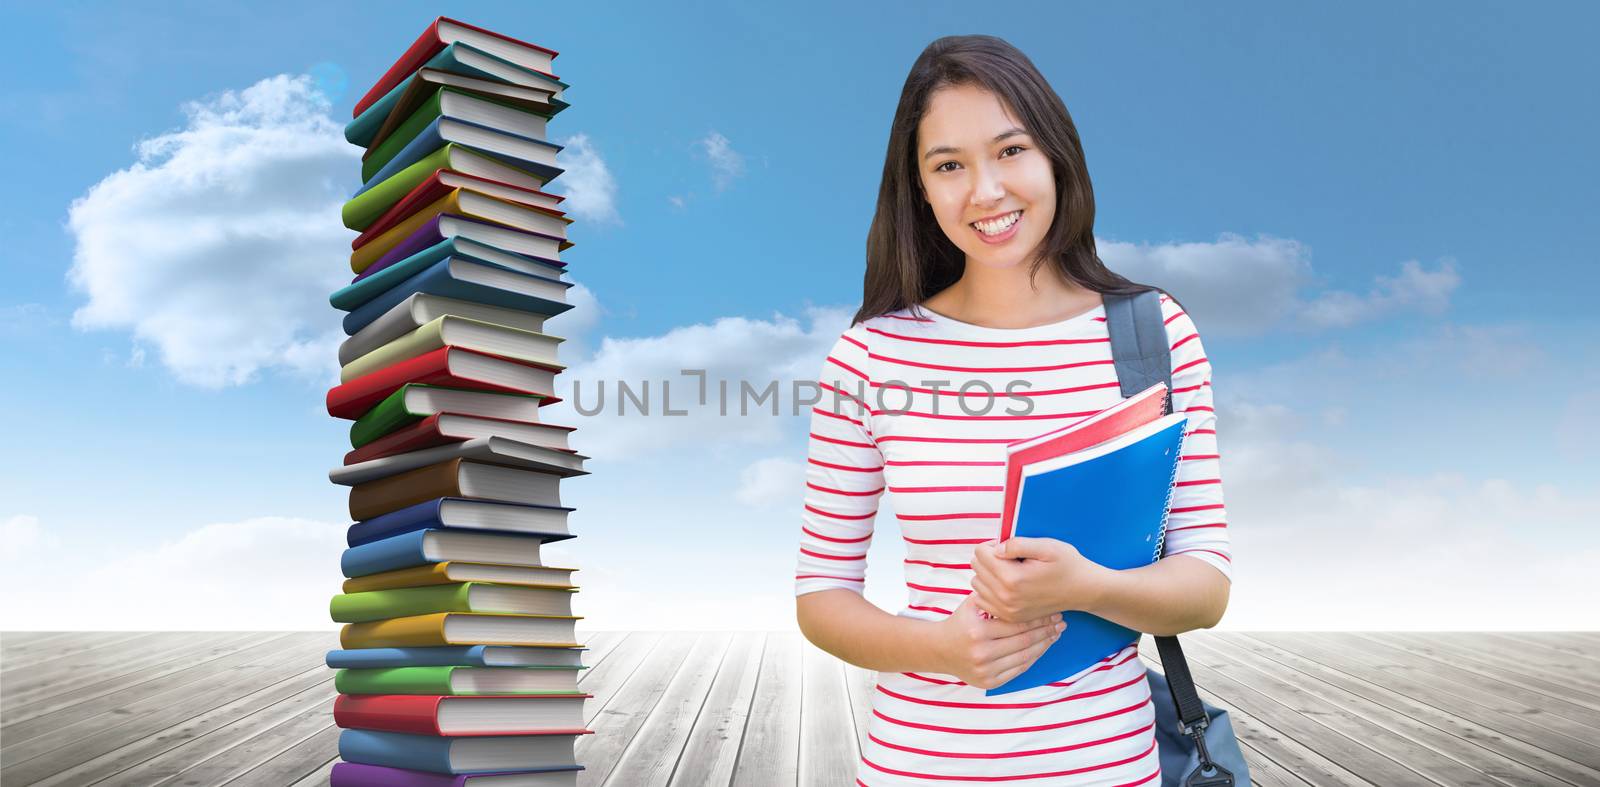 College girl holding books with blurred students in park against stack of books against sky